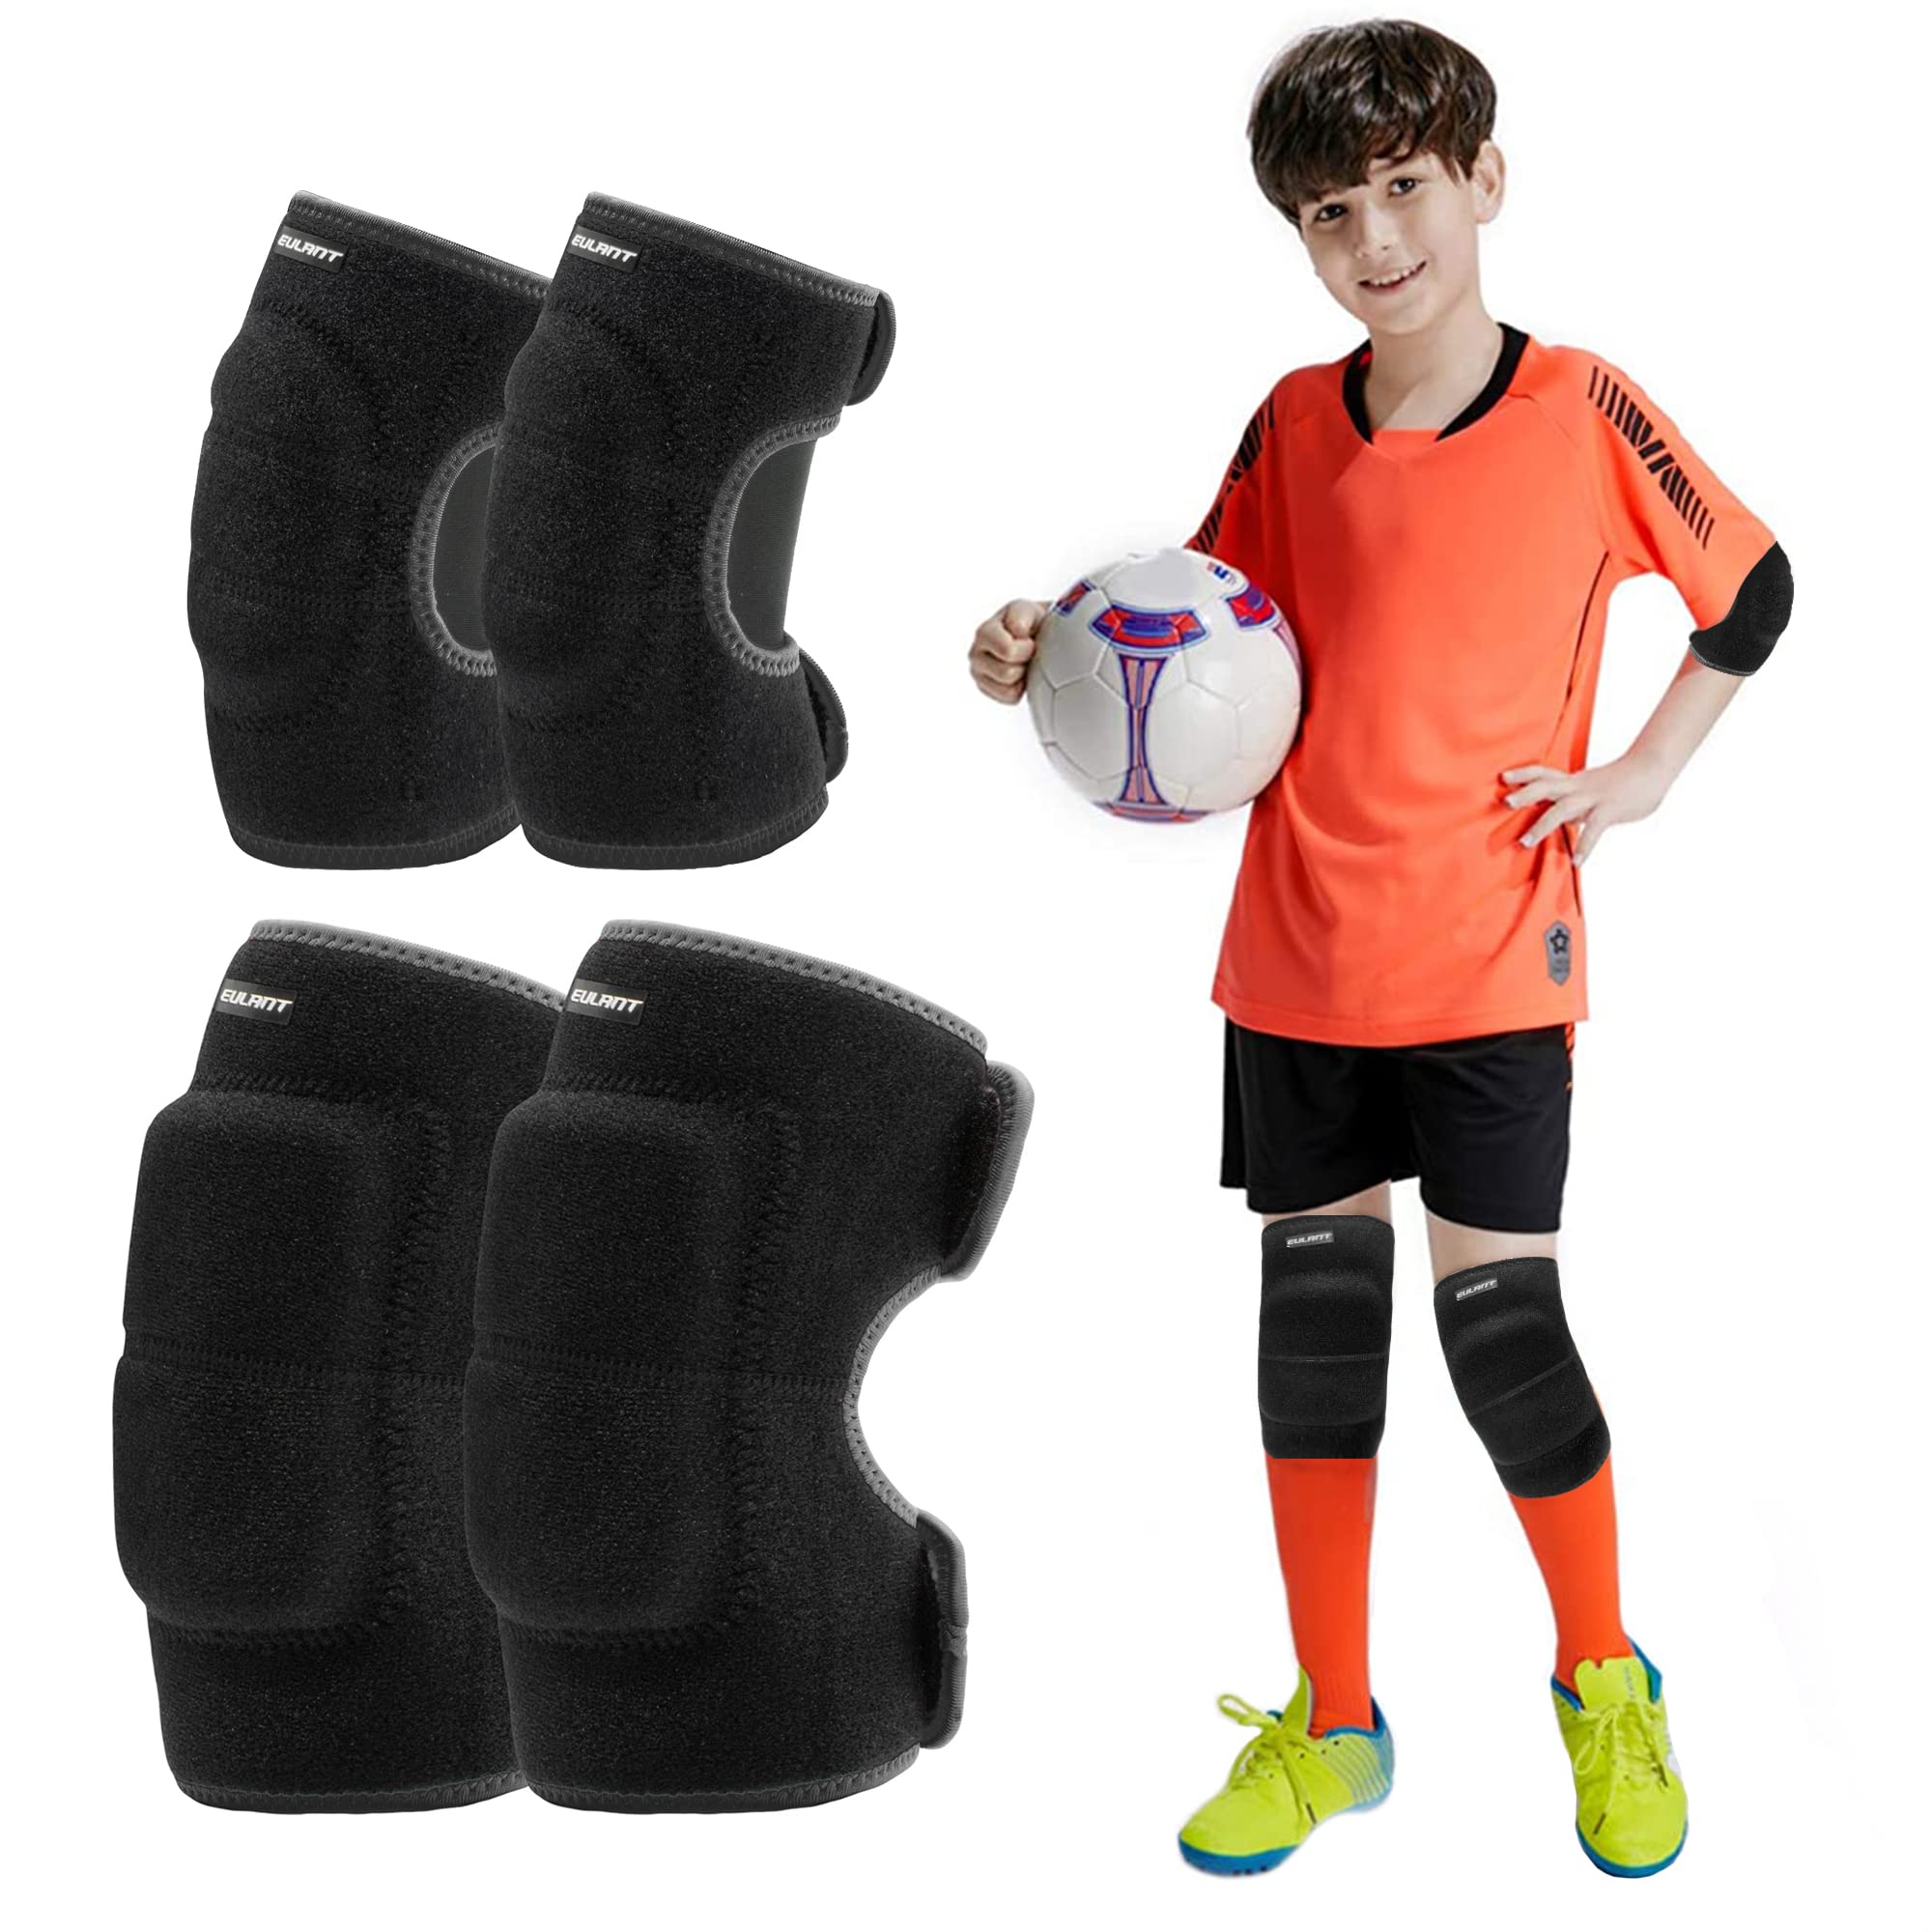 Turtle Shell Sponge Knee Support Professional Protective Sports Dance Knee  Pad Breathable Bandage Knee Brace Basketball Cycling - Elbow & Knee Pads -  AliExpress